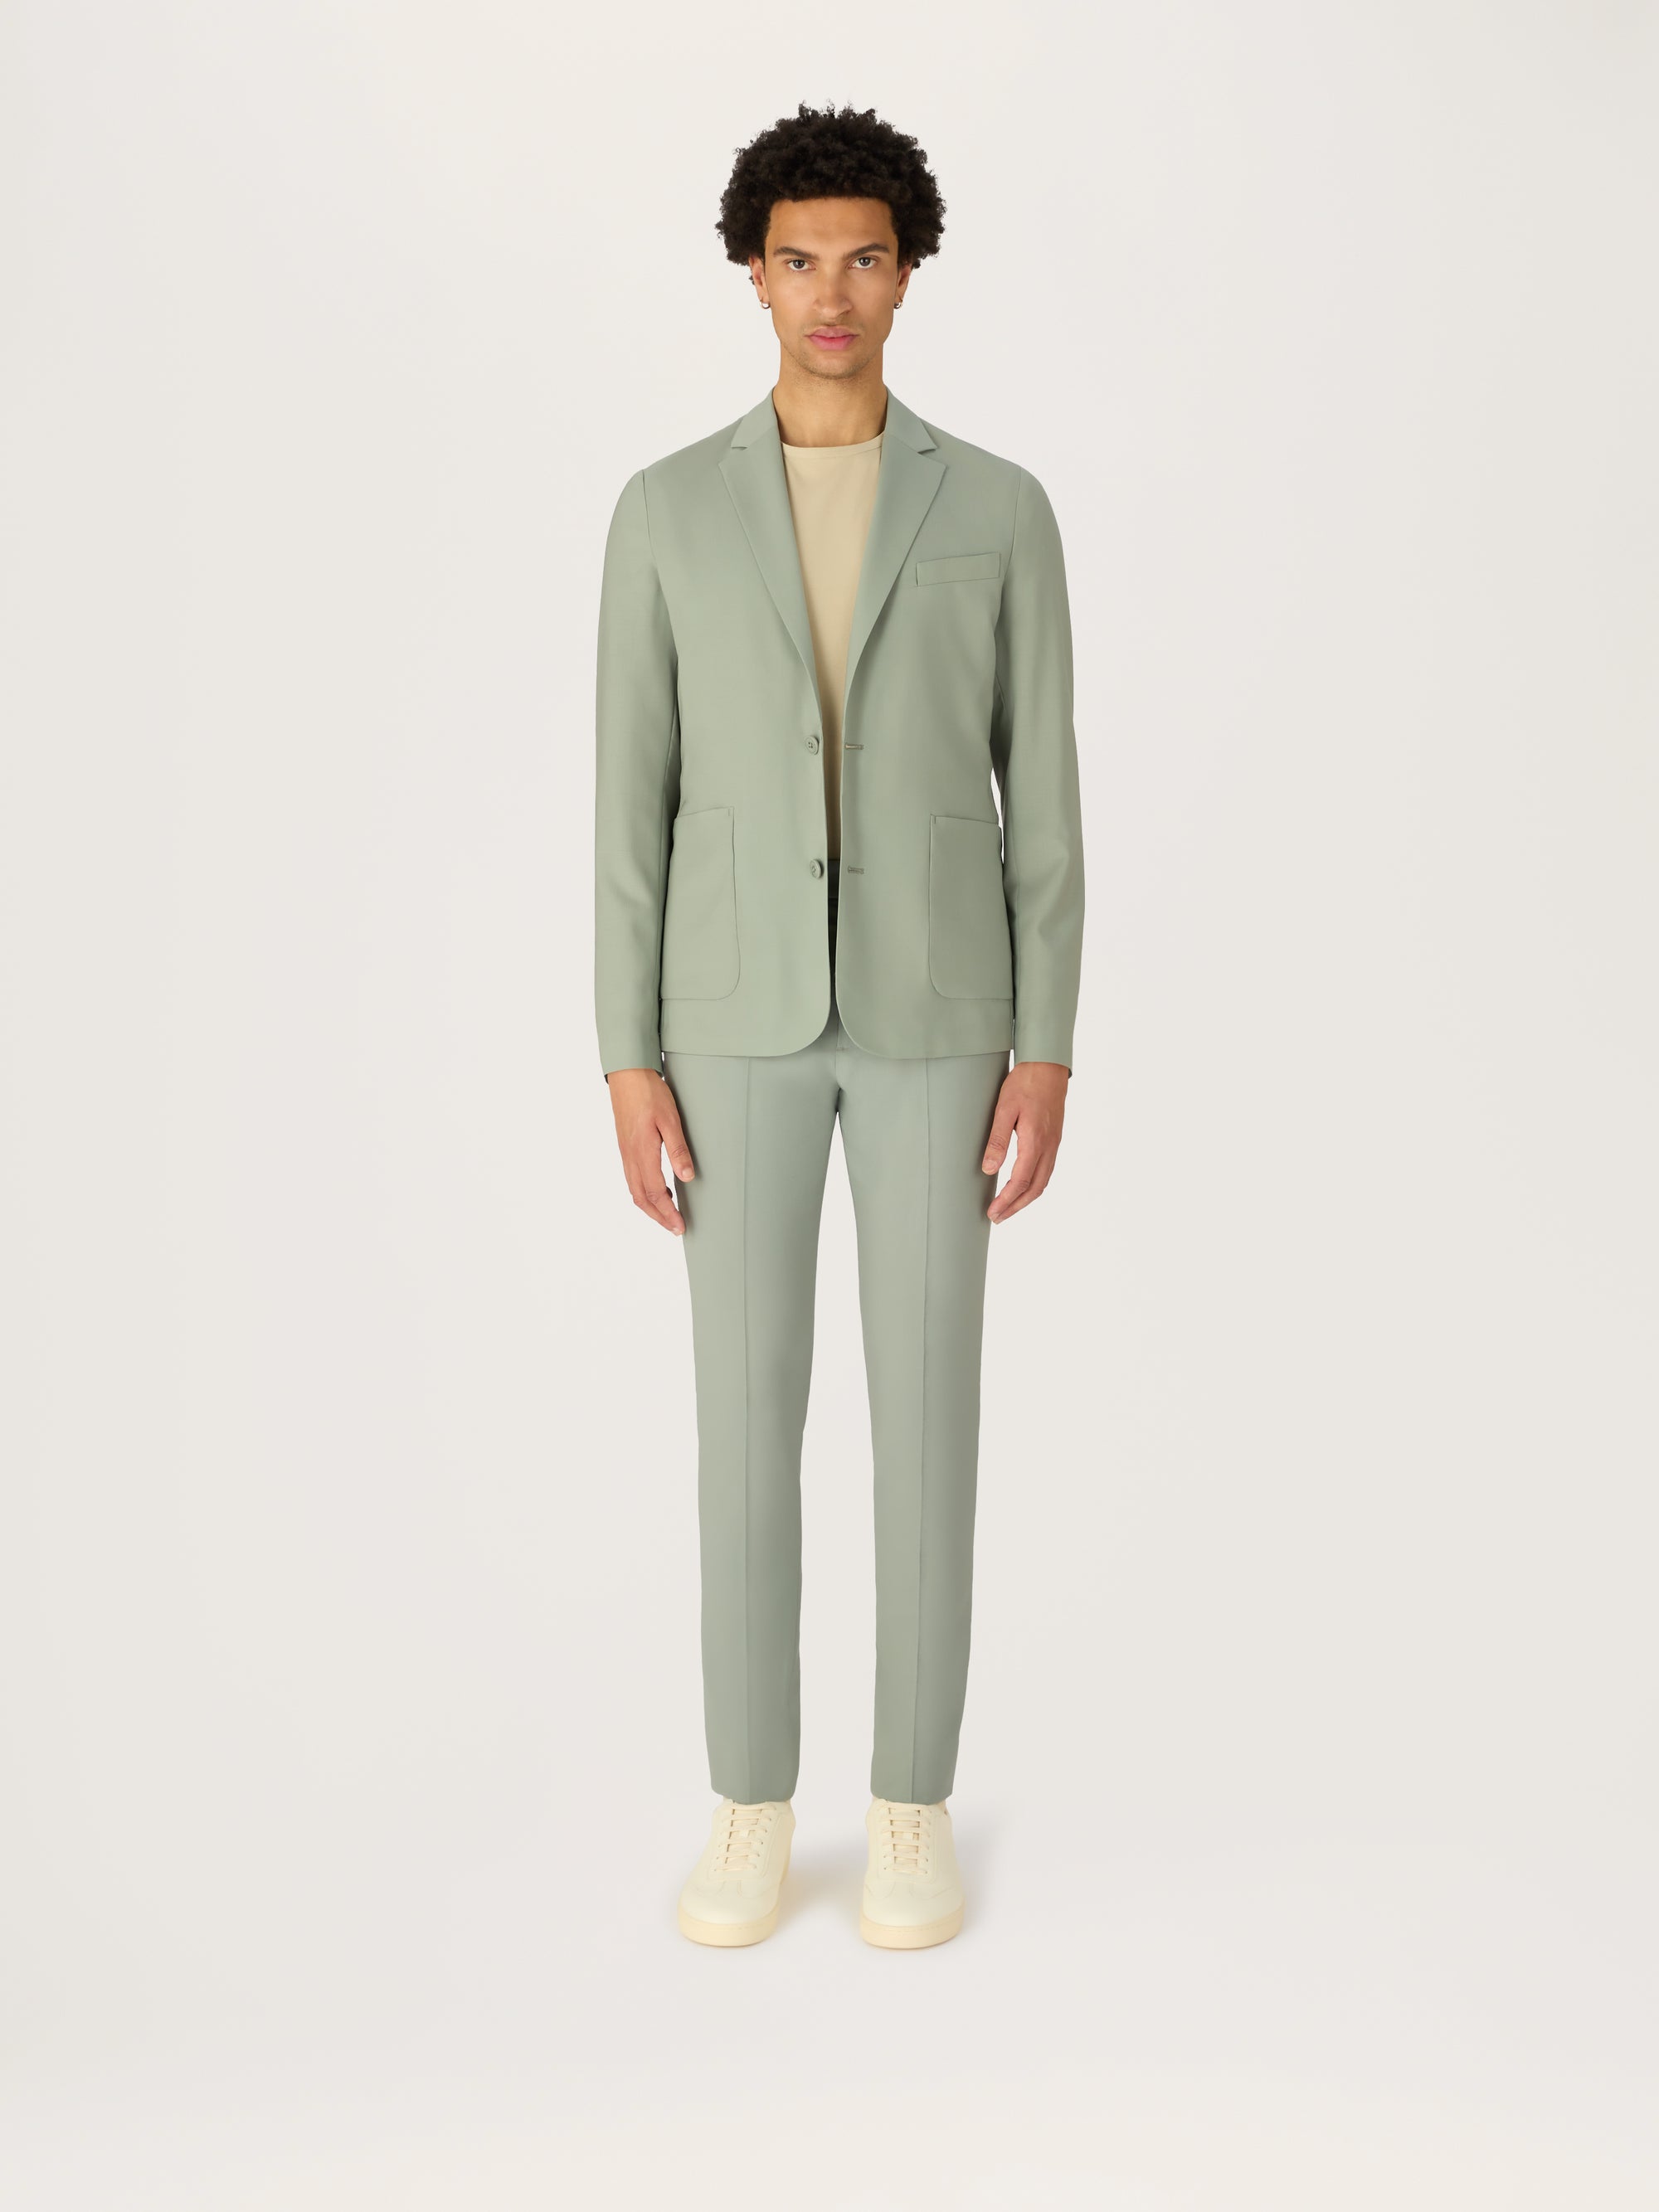 The Sage Tropical Wool Suit